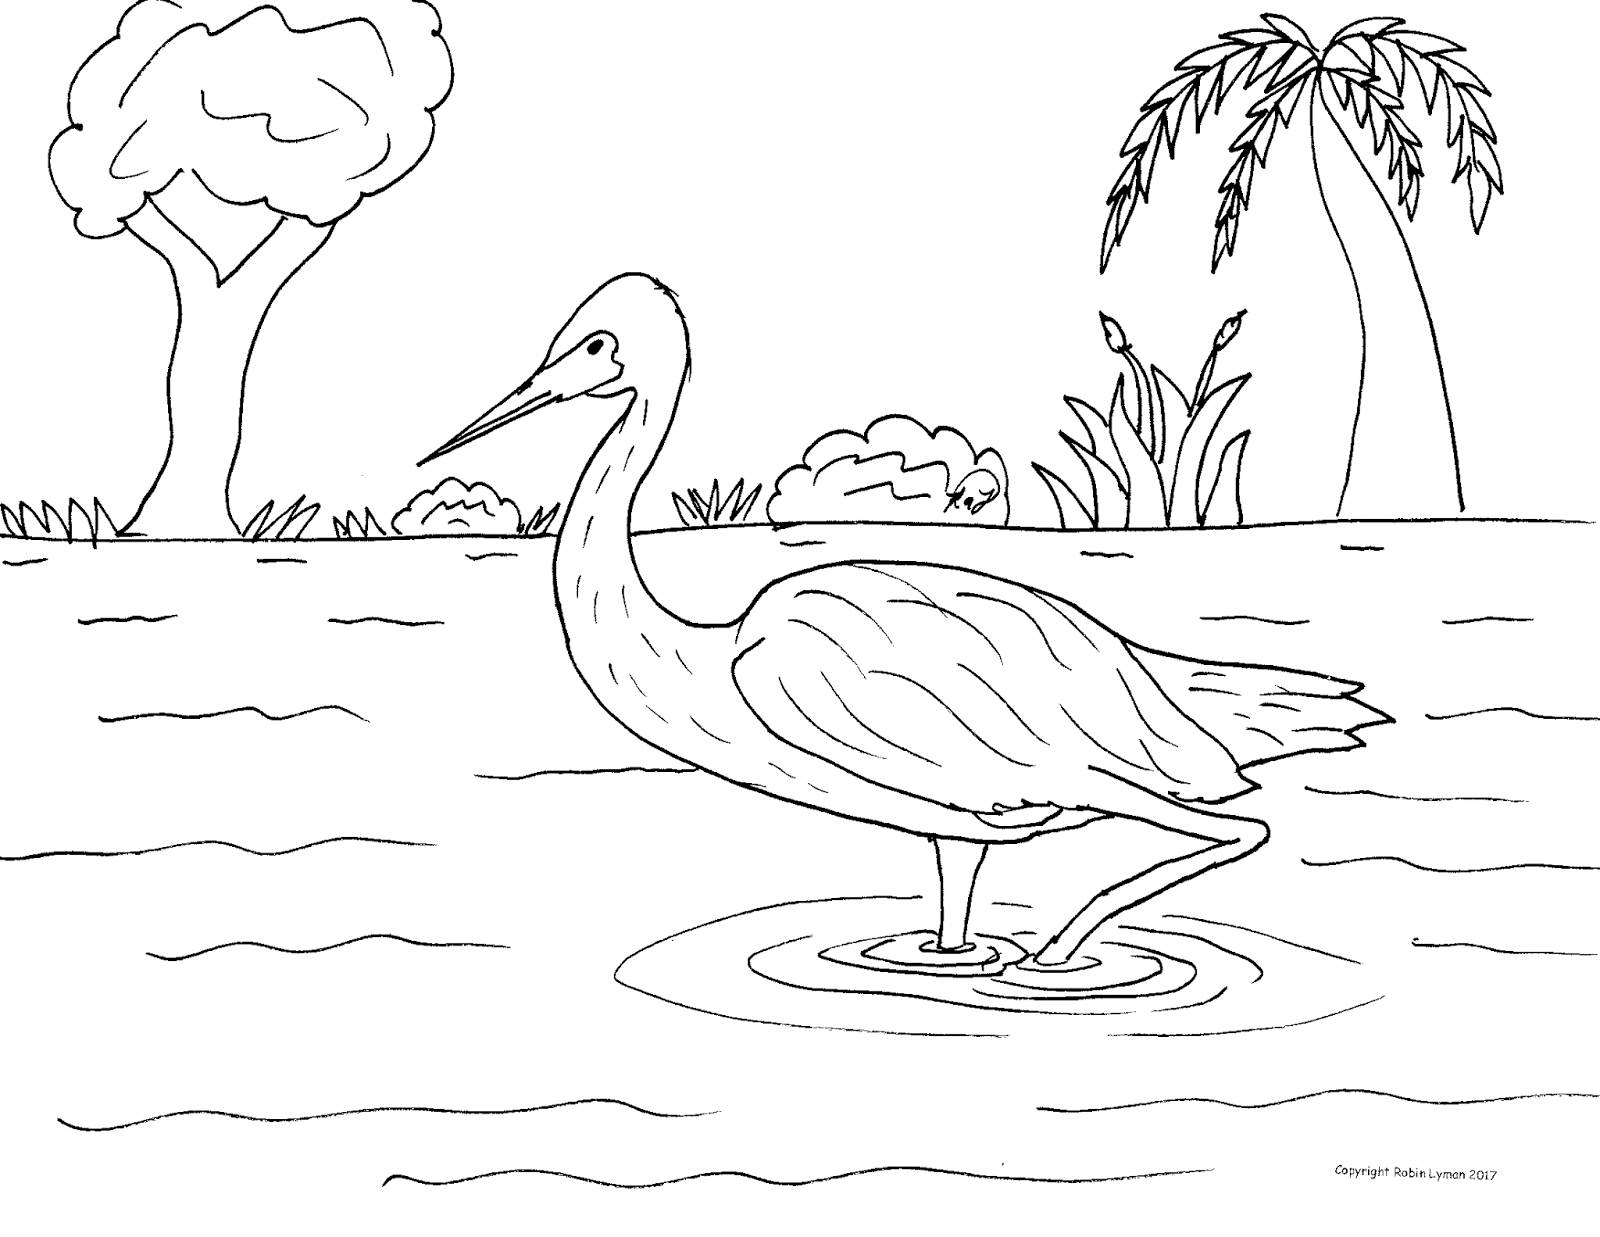 Robin's Great Coloring Pages: Birds of the Yucatan